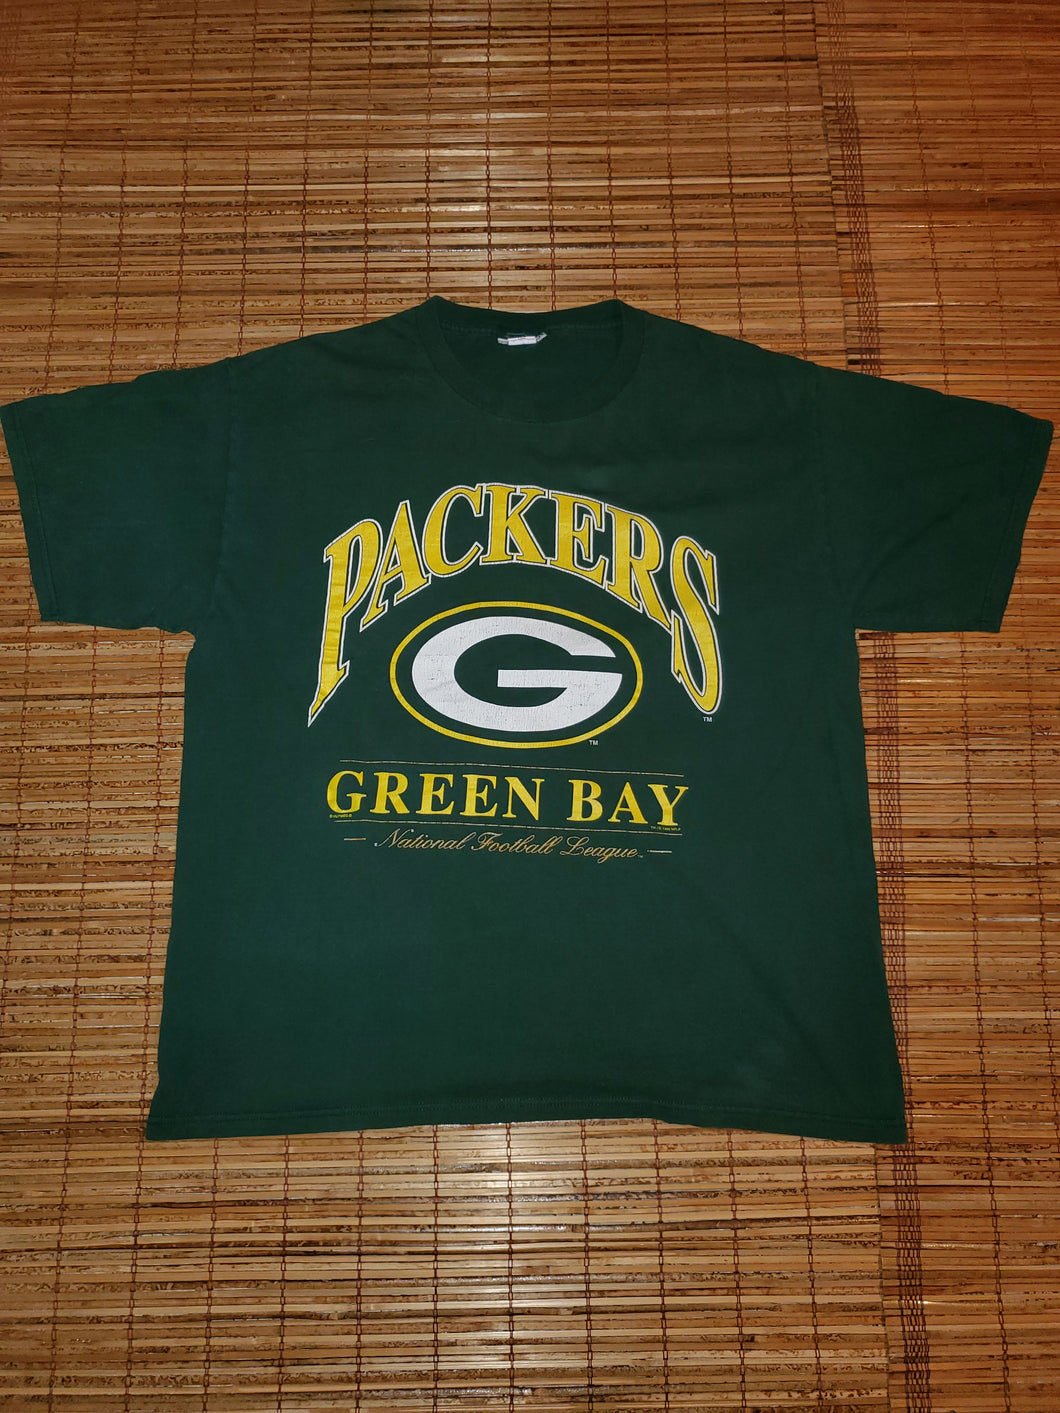 XL - Vintage 1996 Packers Shirt